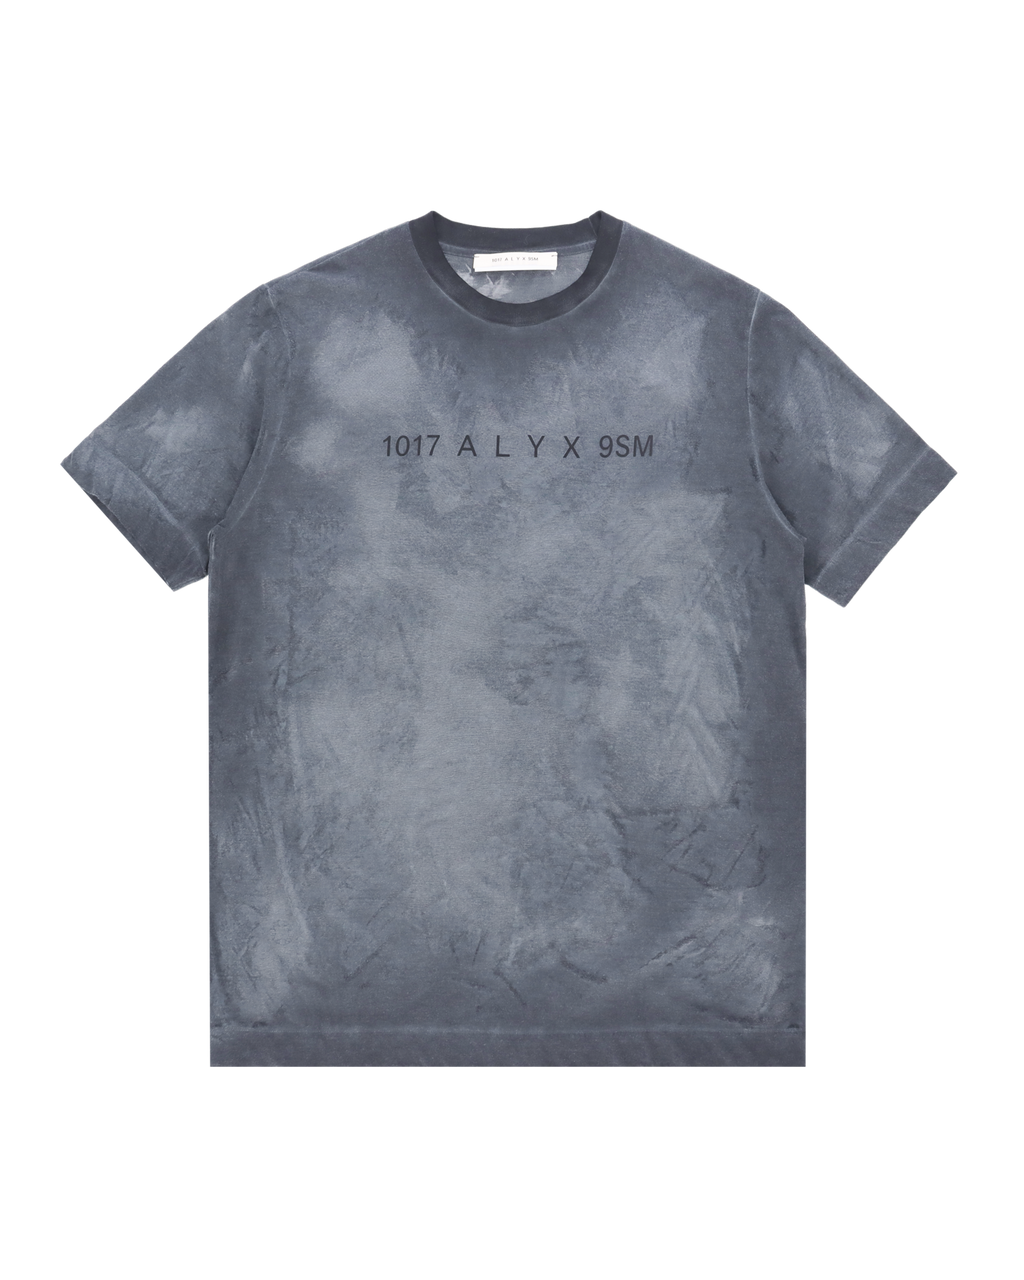 Official Store – 1017 ALYX 9SM